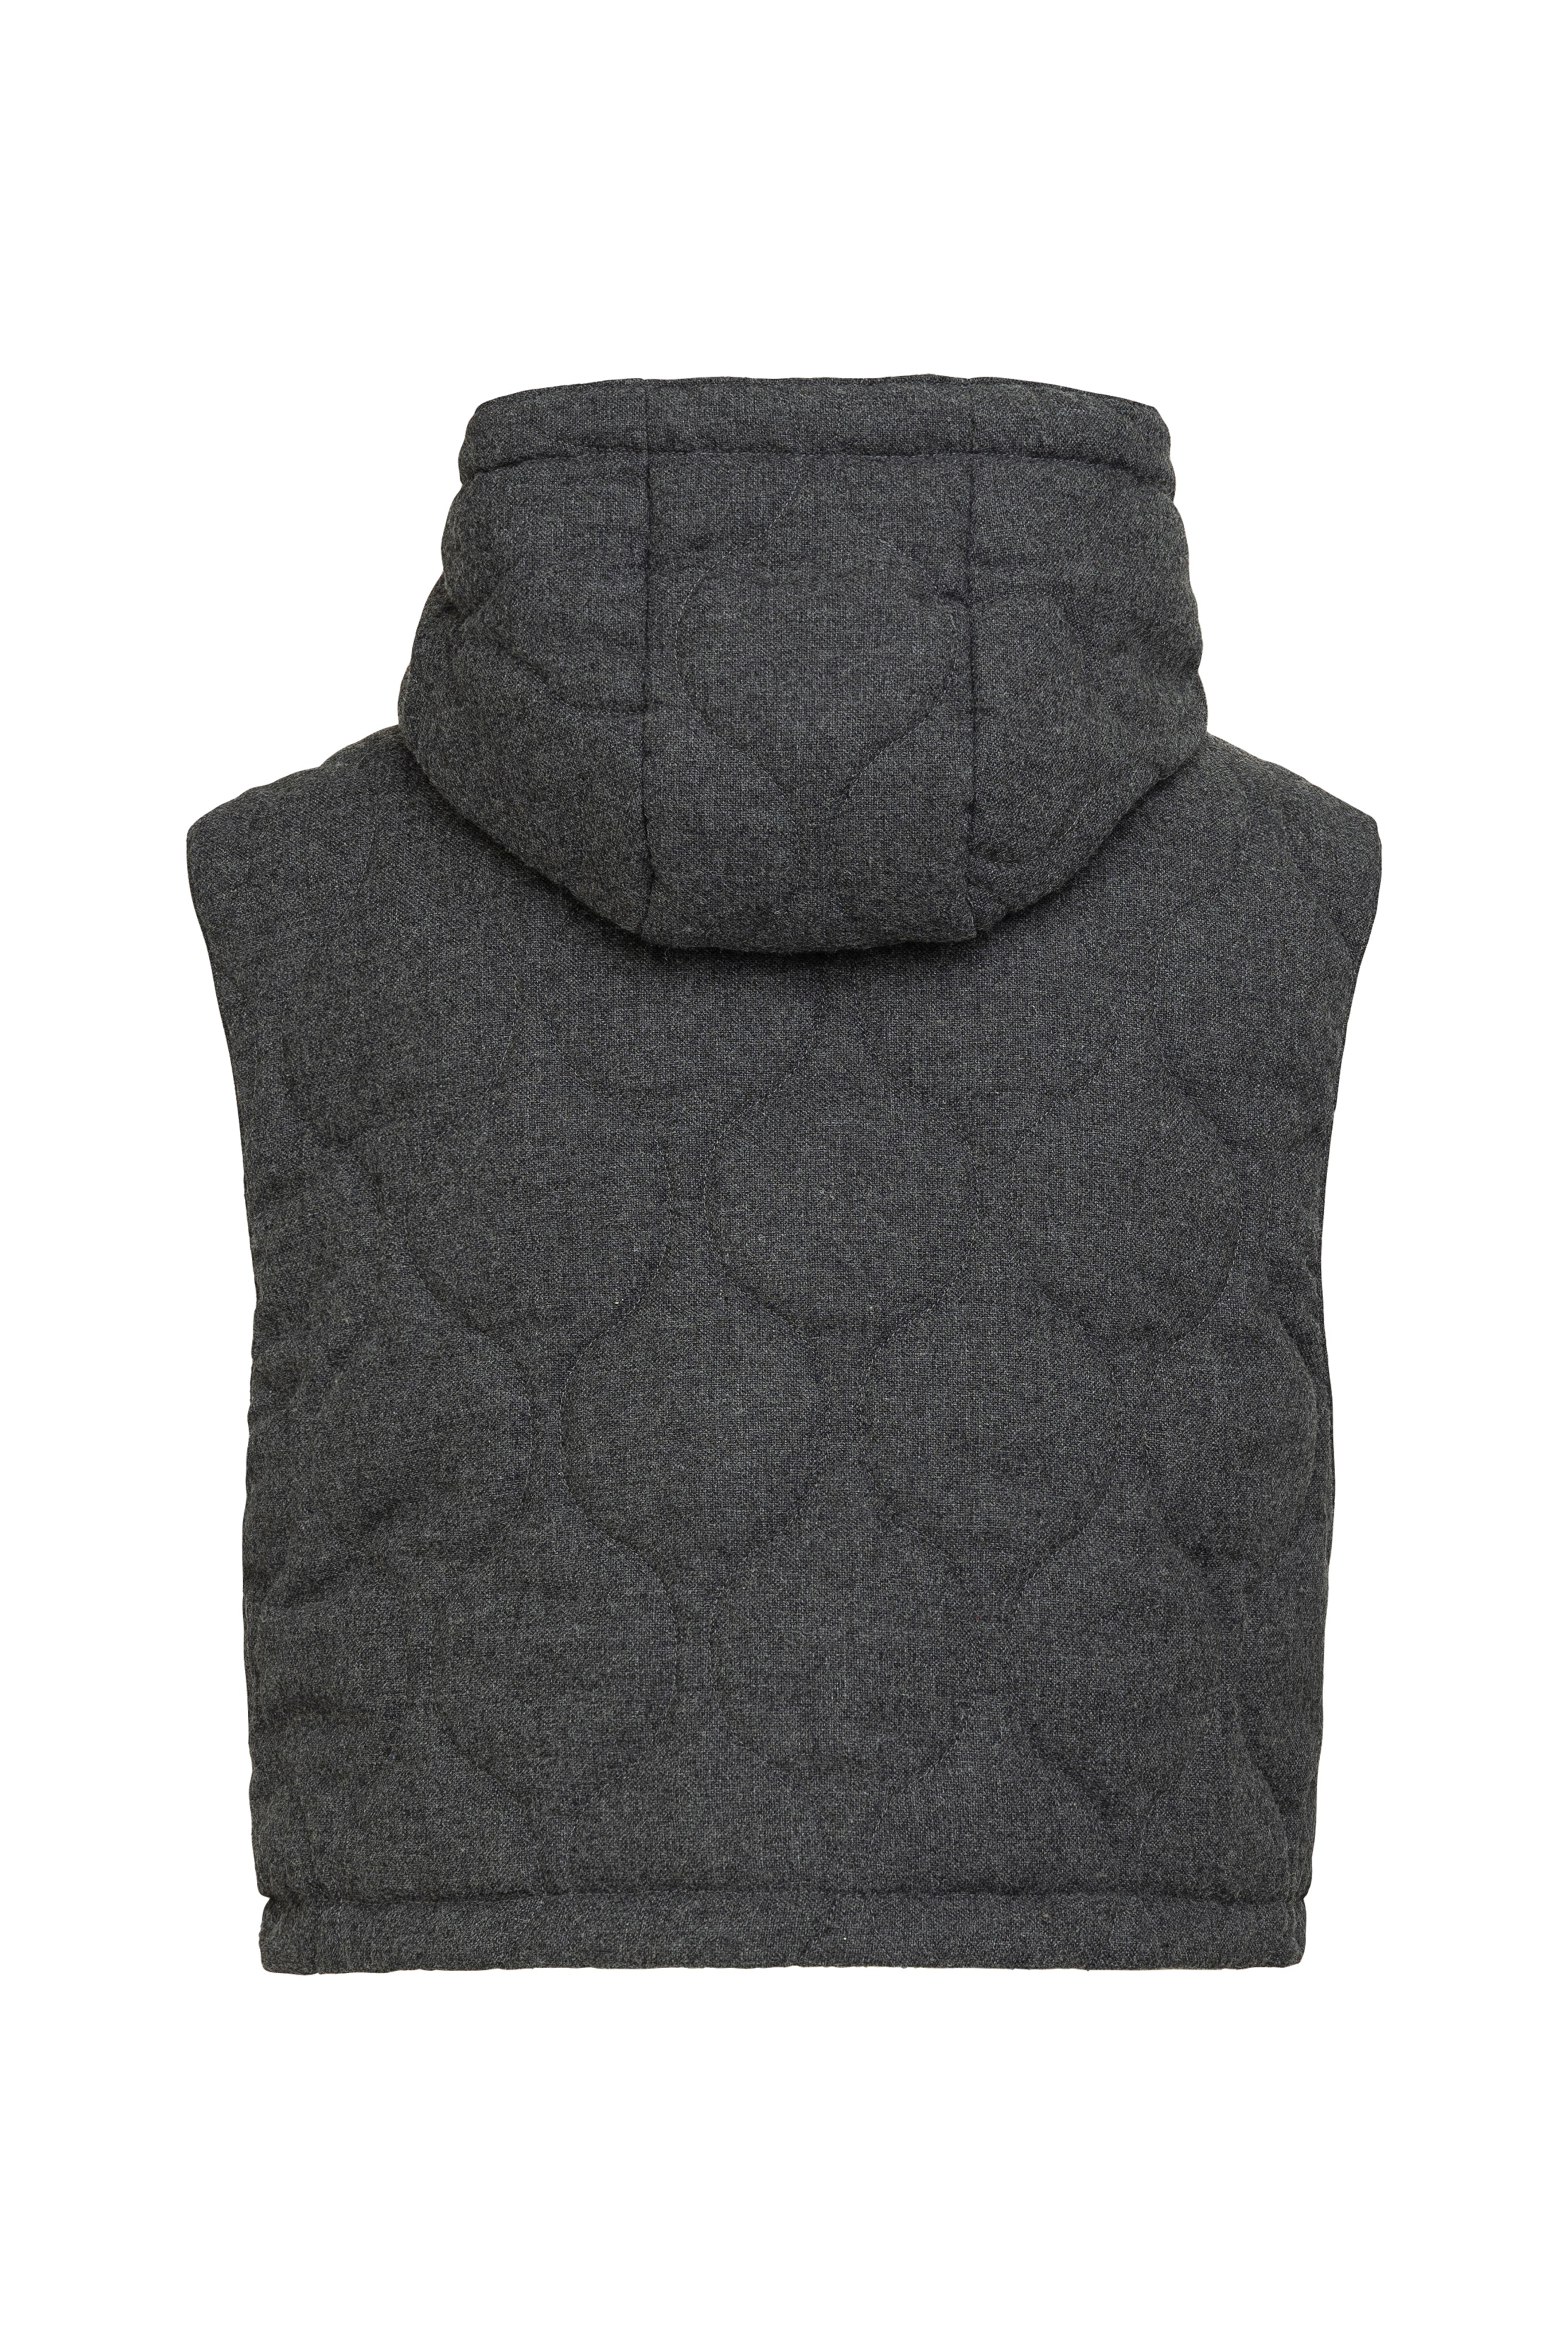 Reversible waistcoat made of loden and print